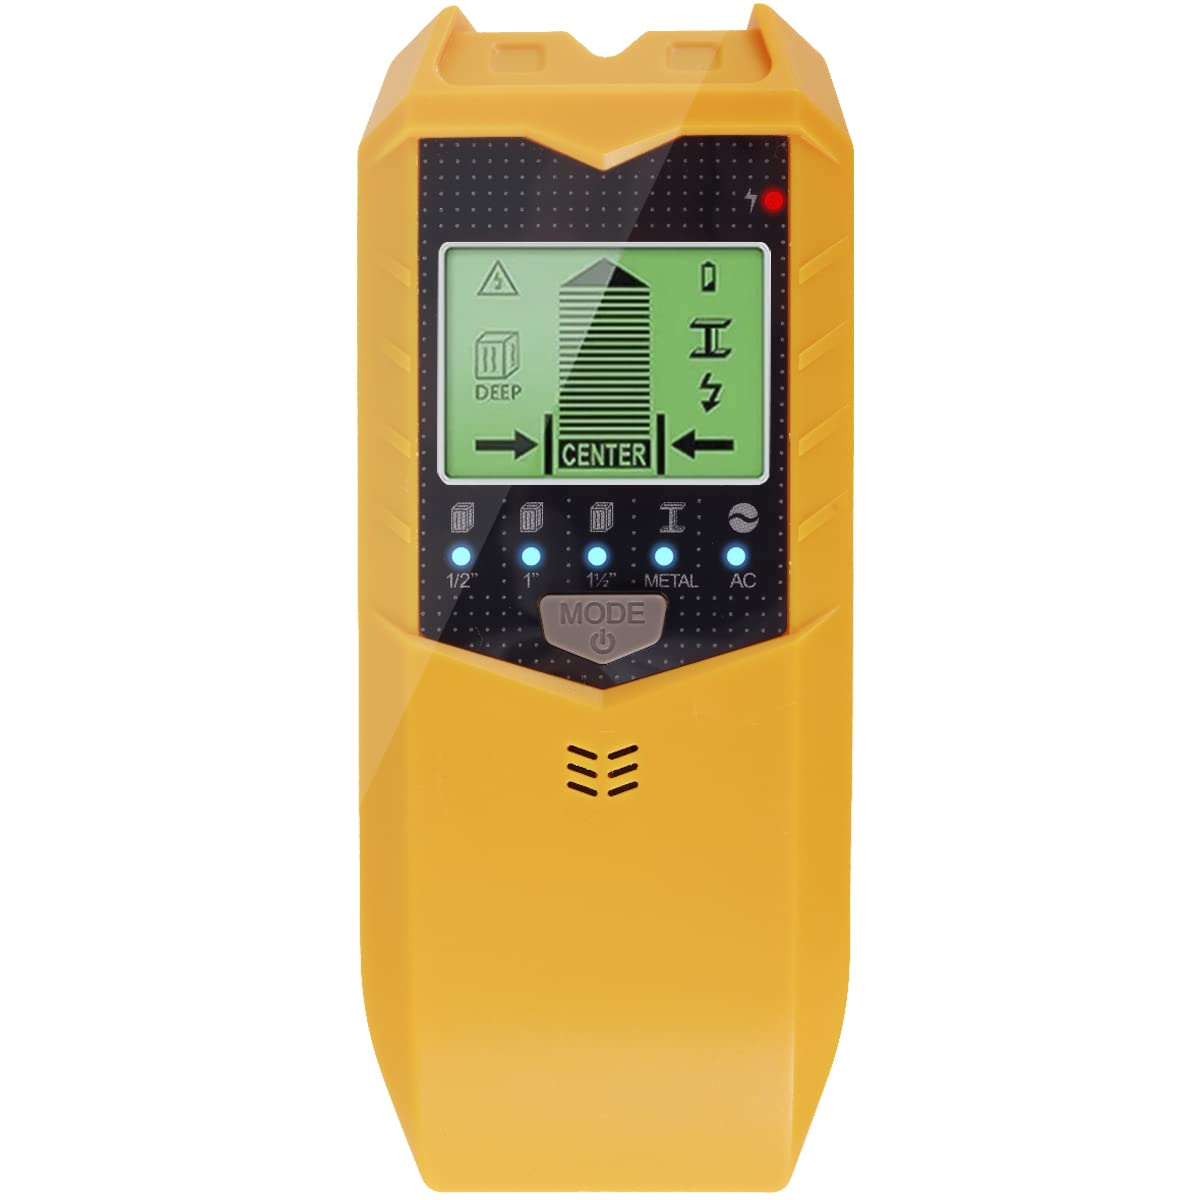 GUANSHANG Stud Finder Sensor 5 in 1 Battery Operated SH402 Wall Scanner Detector Portable Electronic Detector with LED Display and Audio Alarm Handheld Stud Detector for Wood AC Wire Metal ZM(yellow)